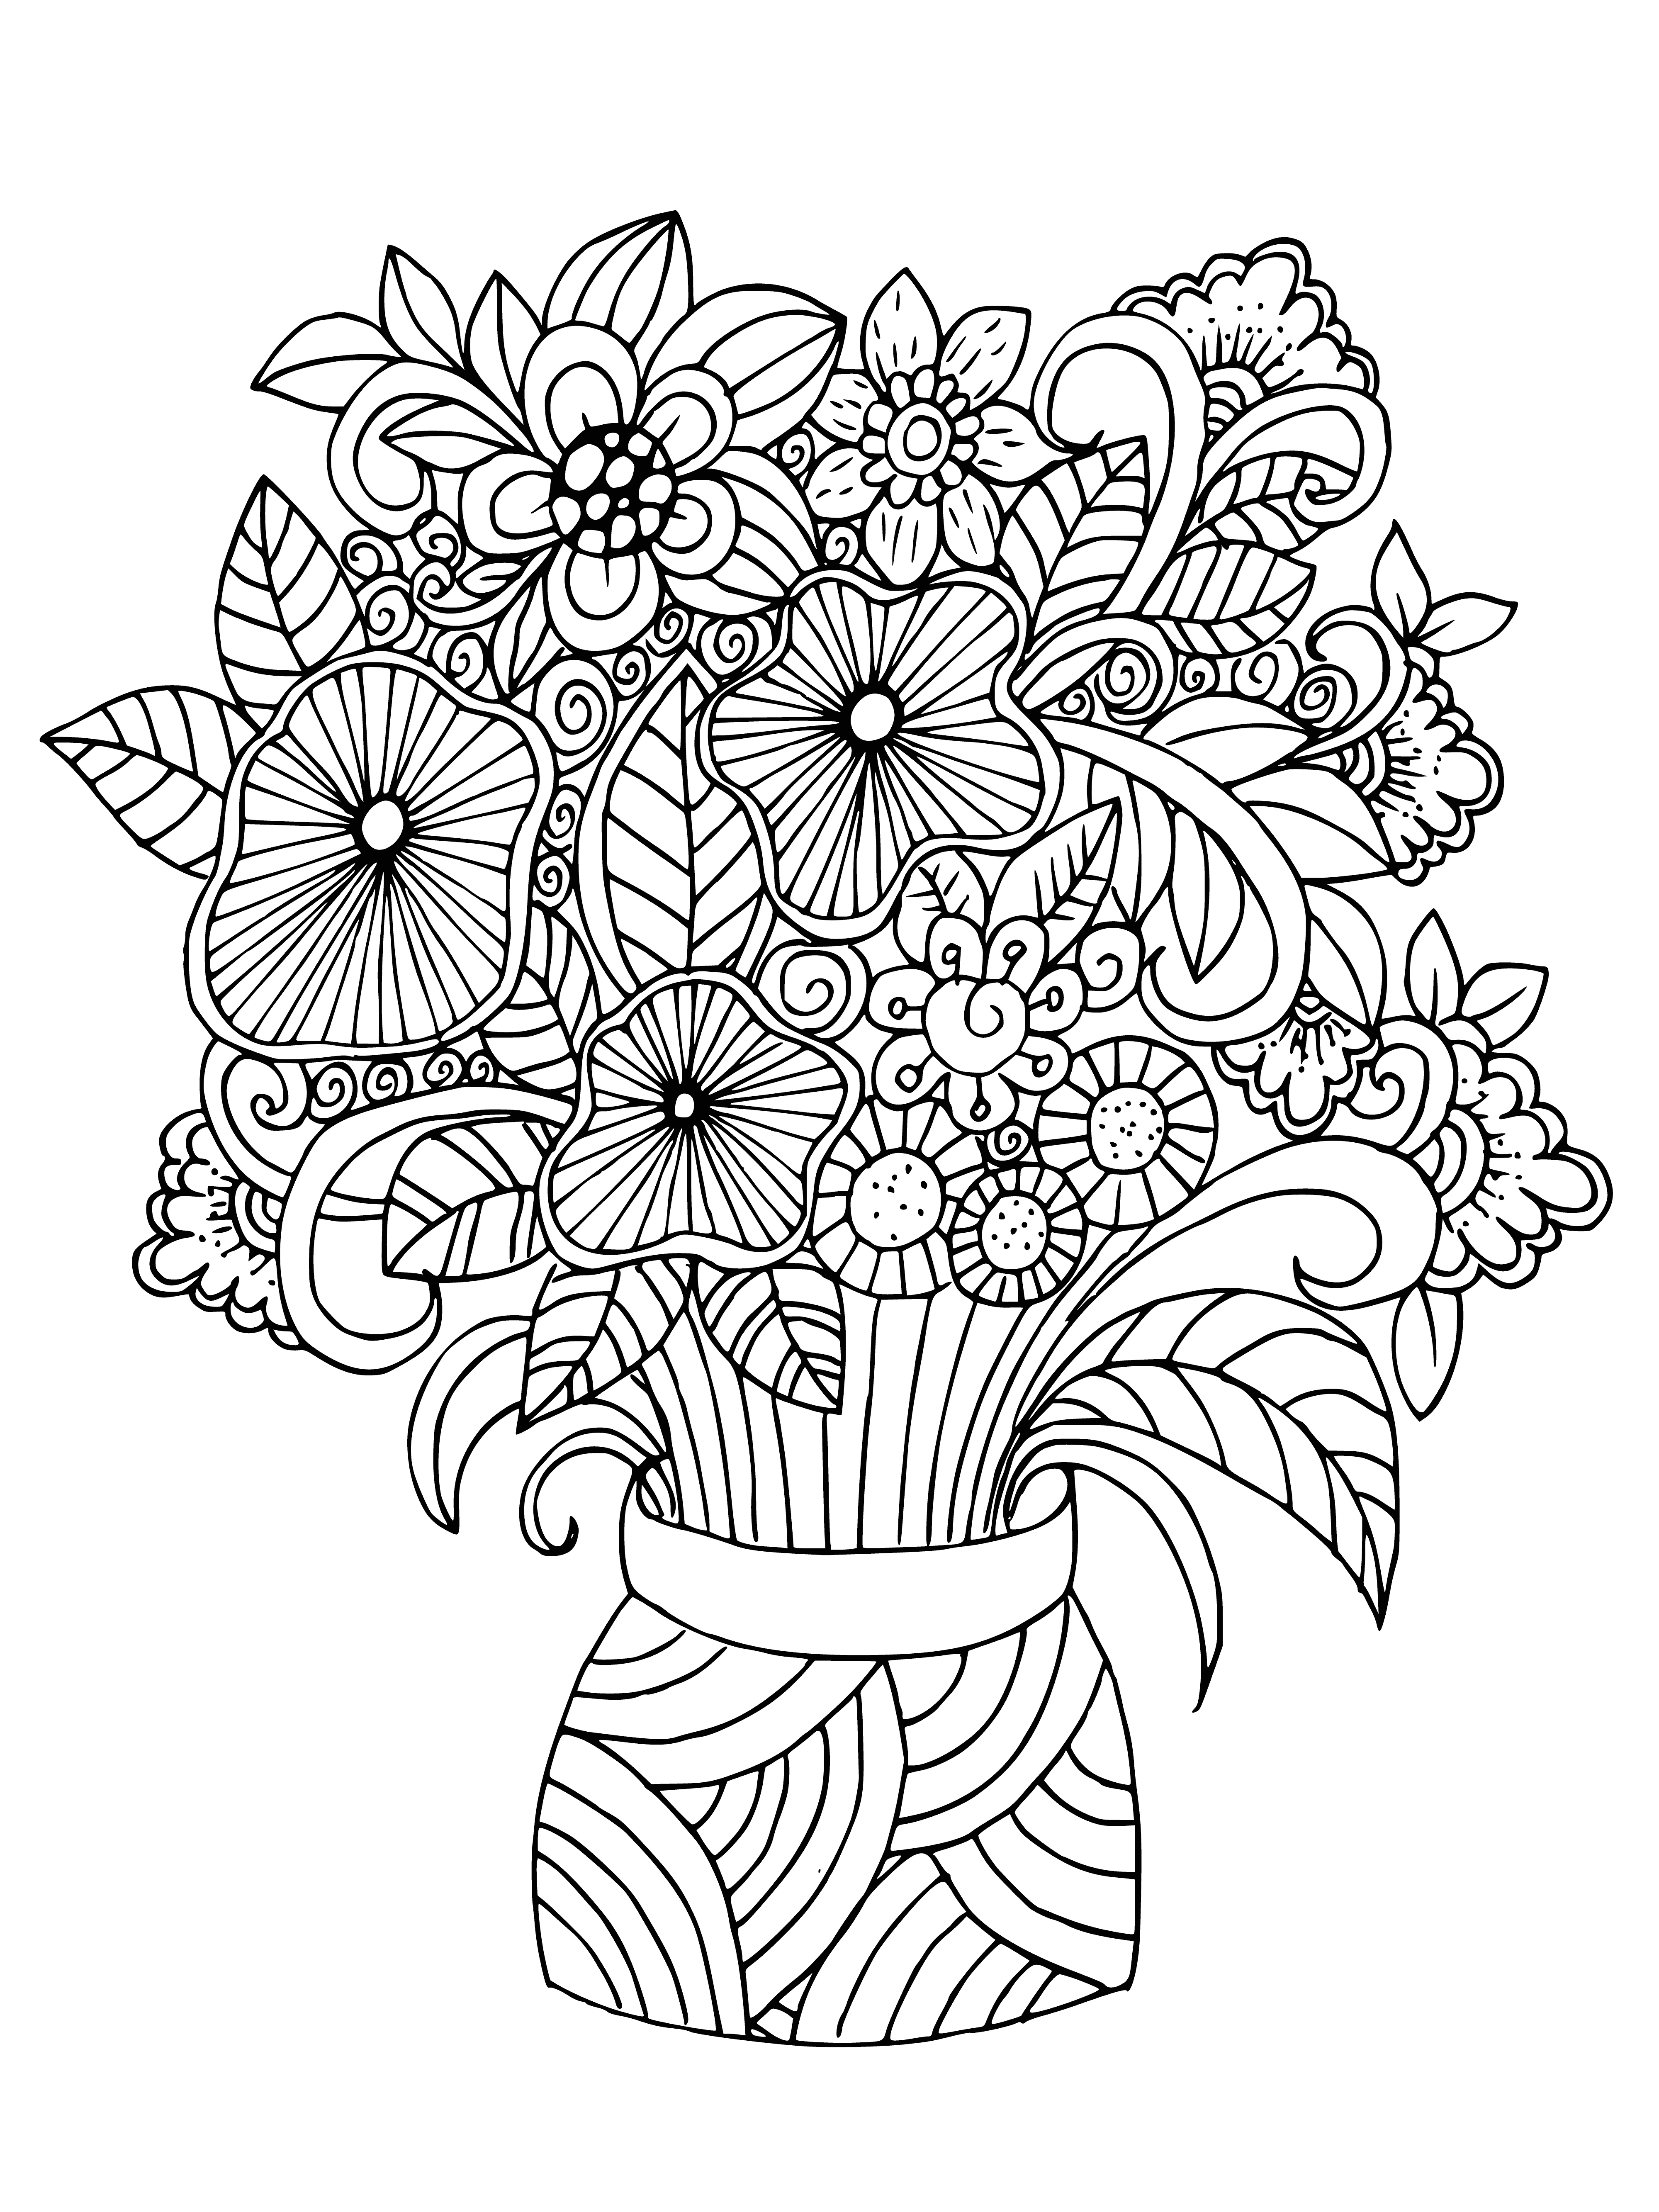 coloring page: Pretty flowers in a vase on a table, different sizes & types of blooms, calming illustration to color.